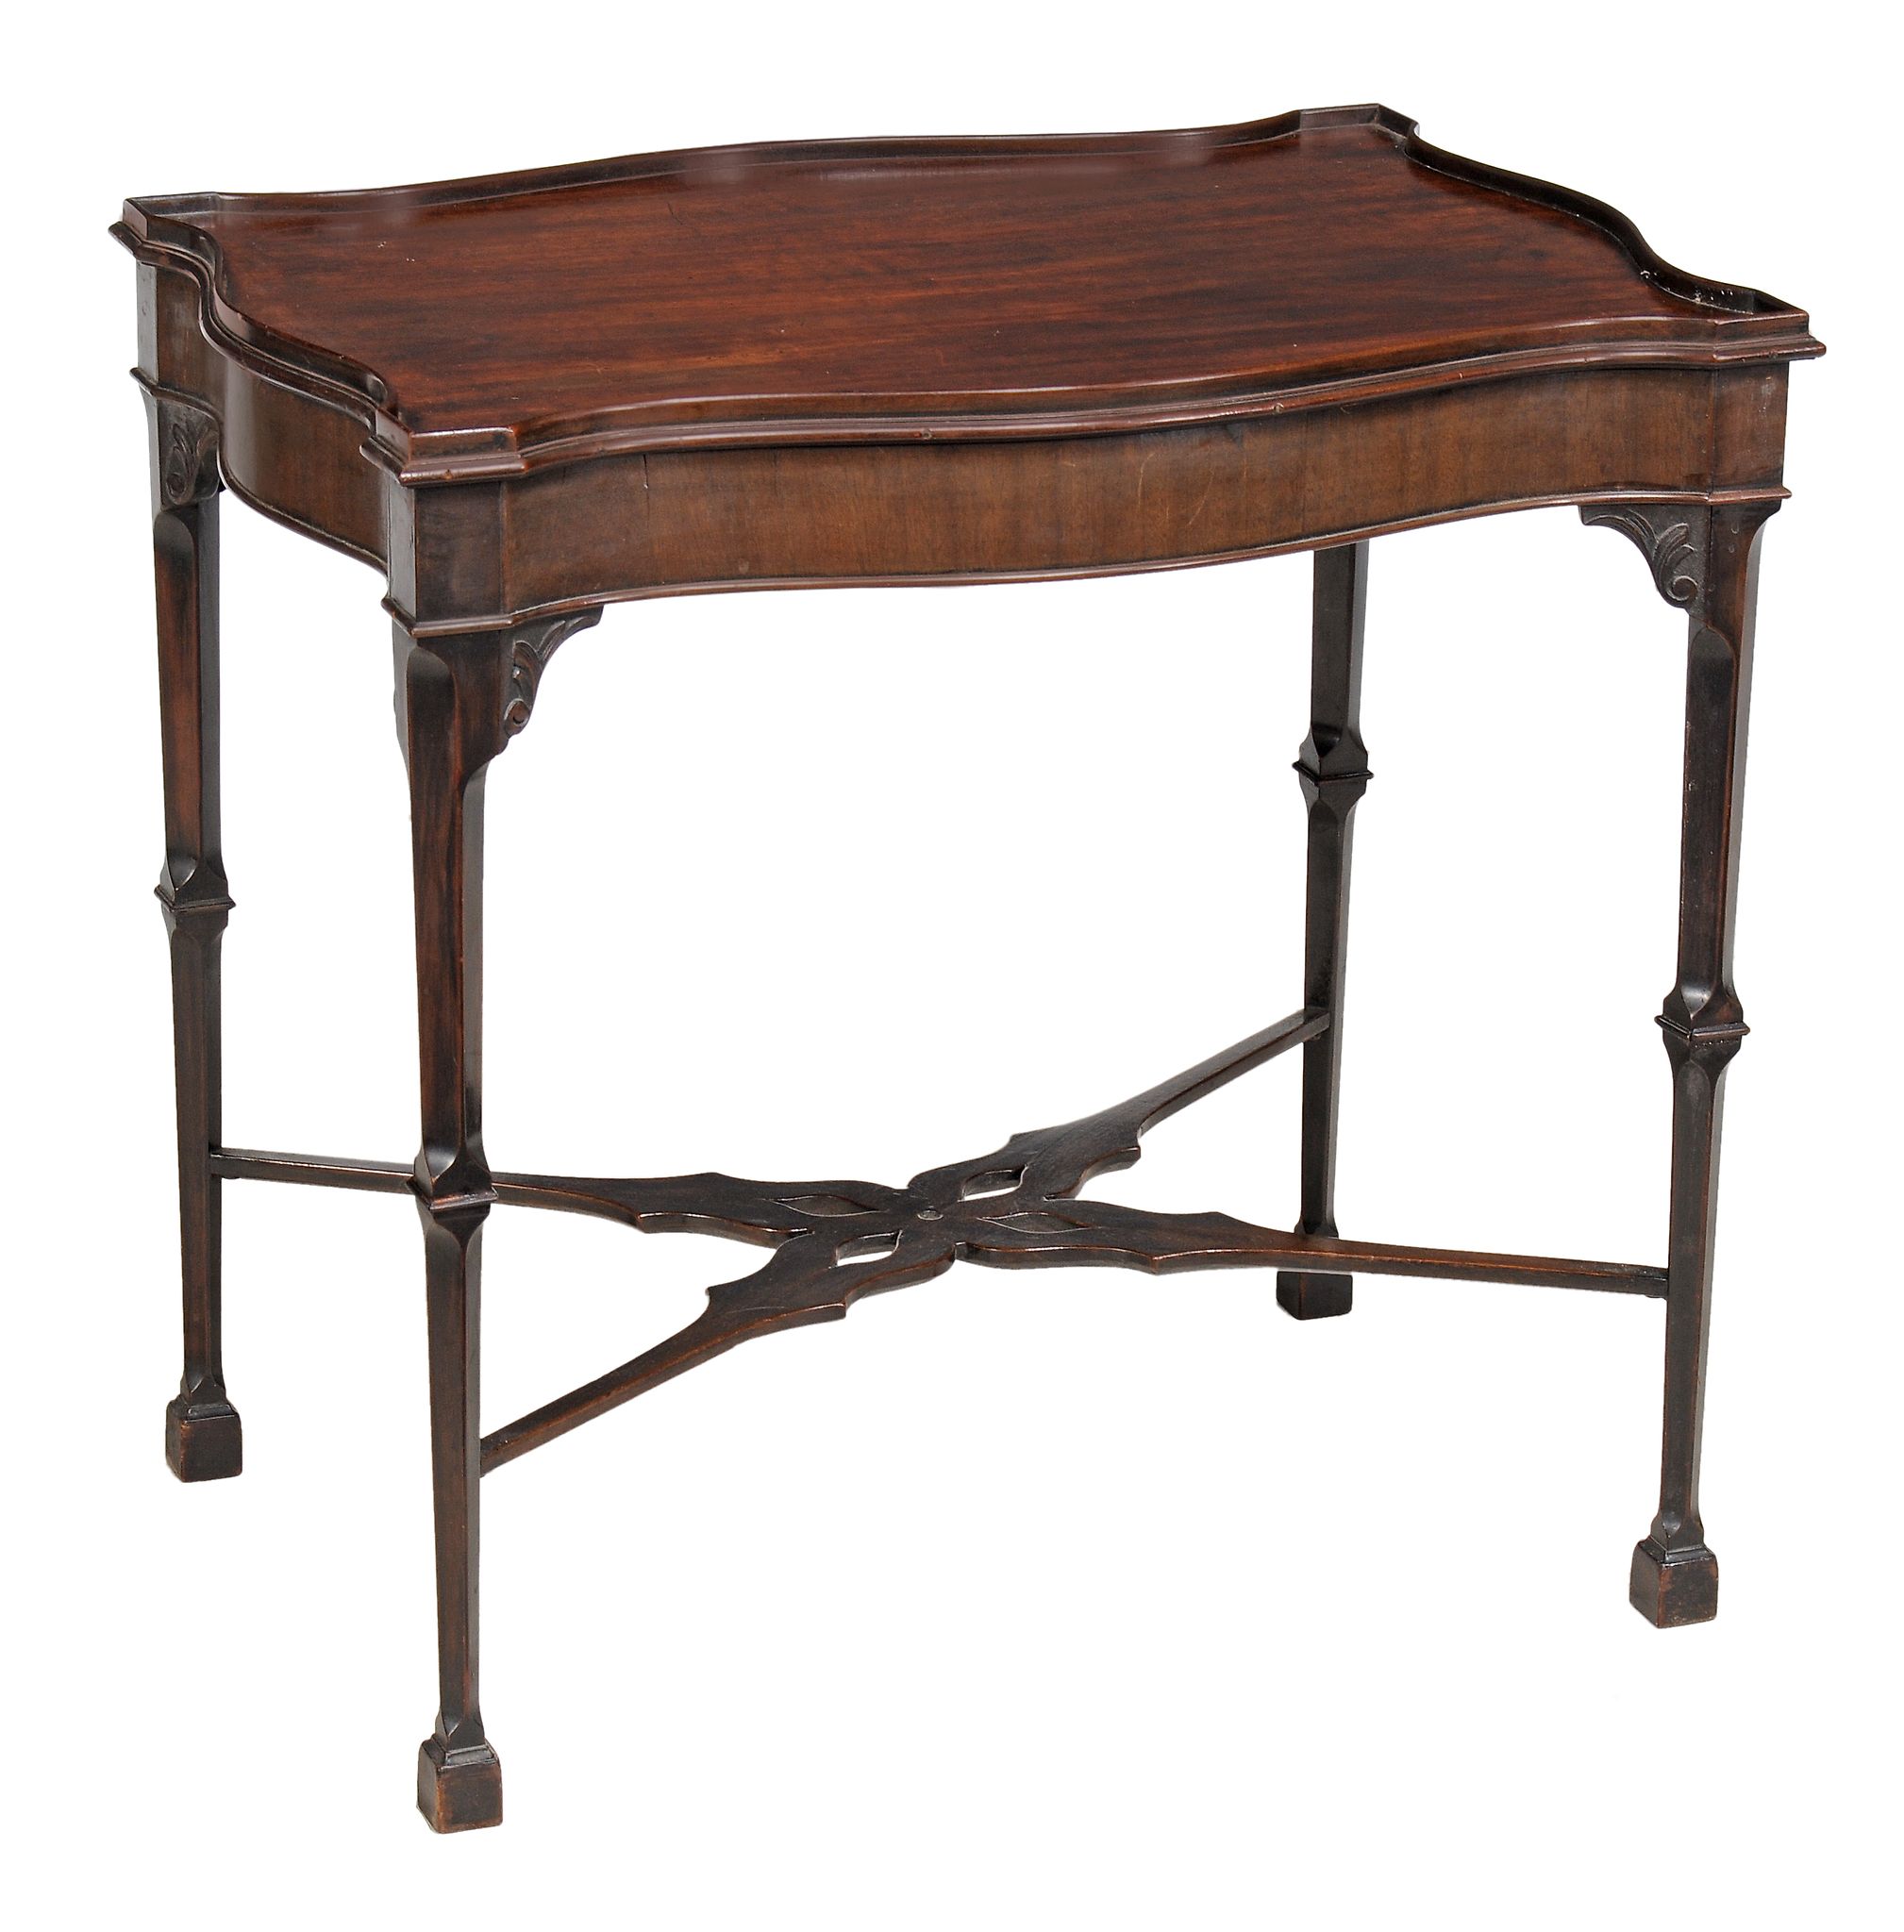 A mahogany silver table in George III style A mahogany silver table in George III style, late 19th/